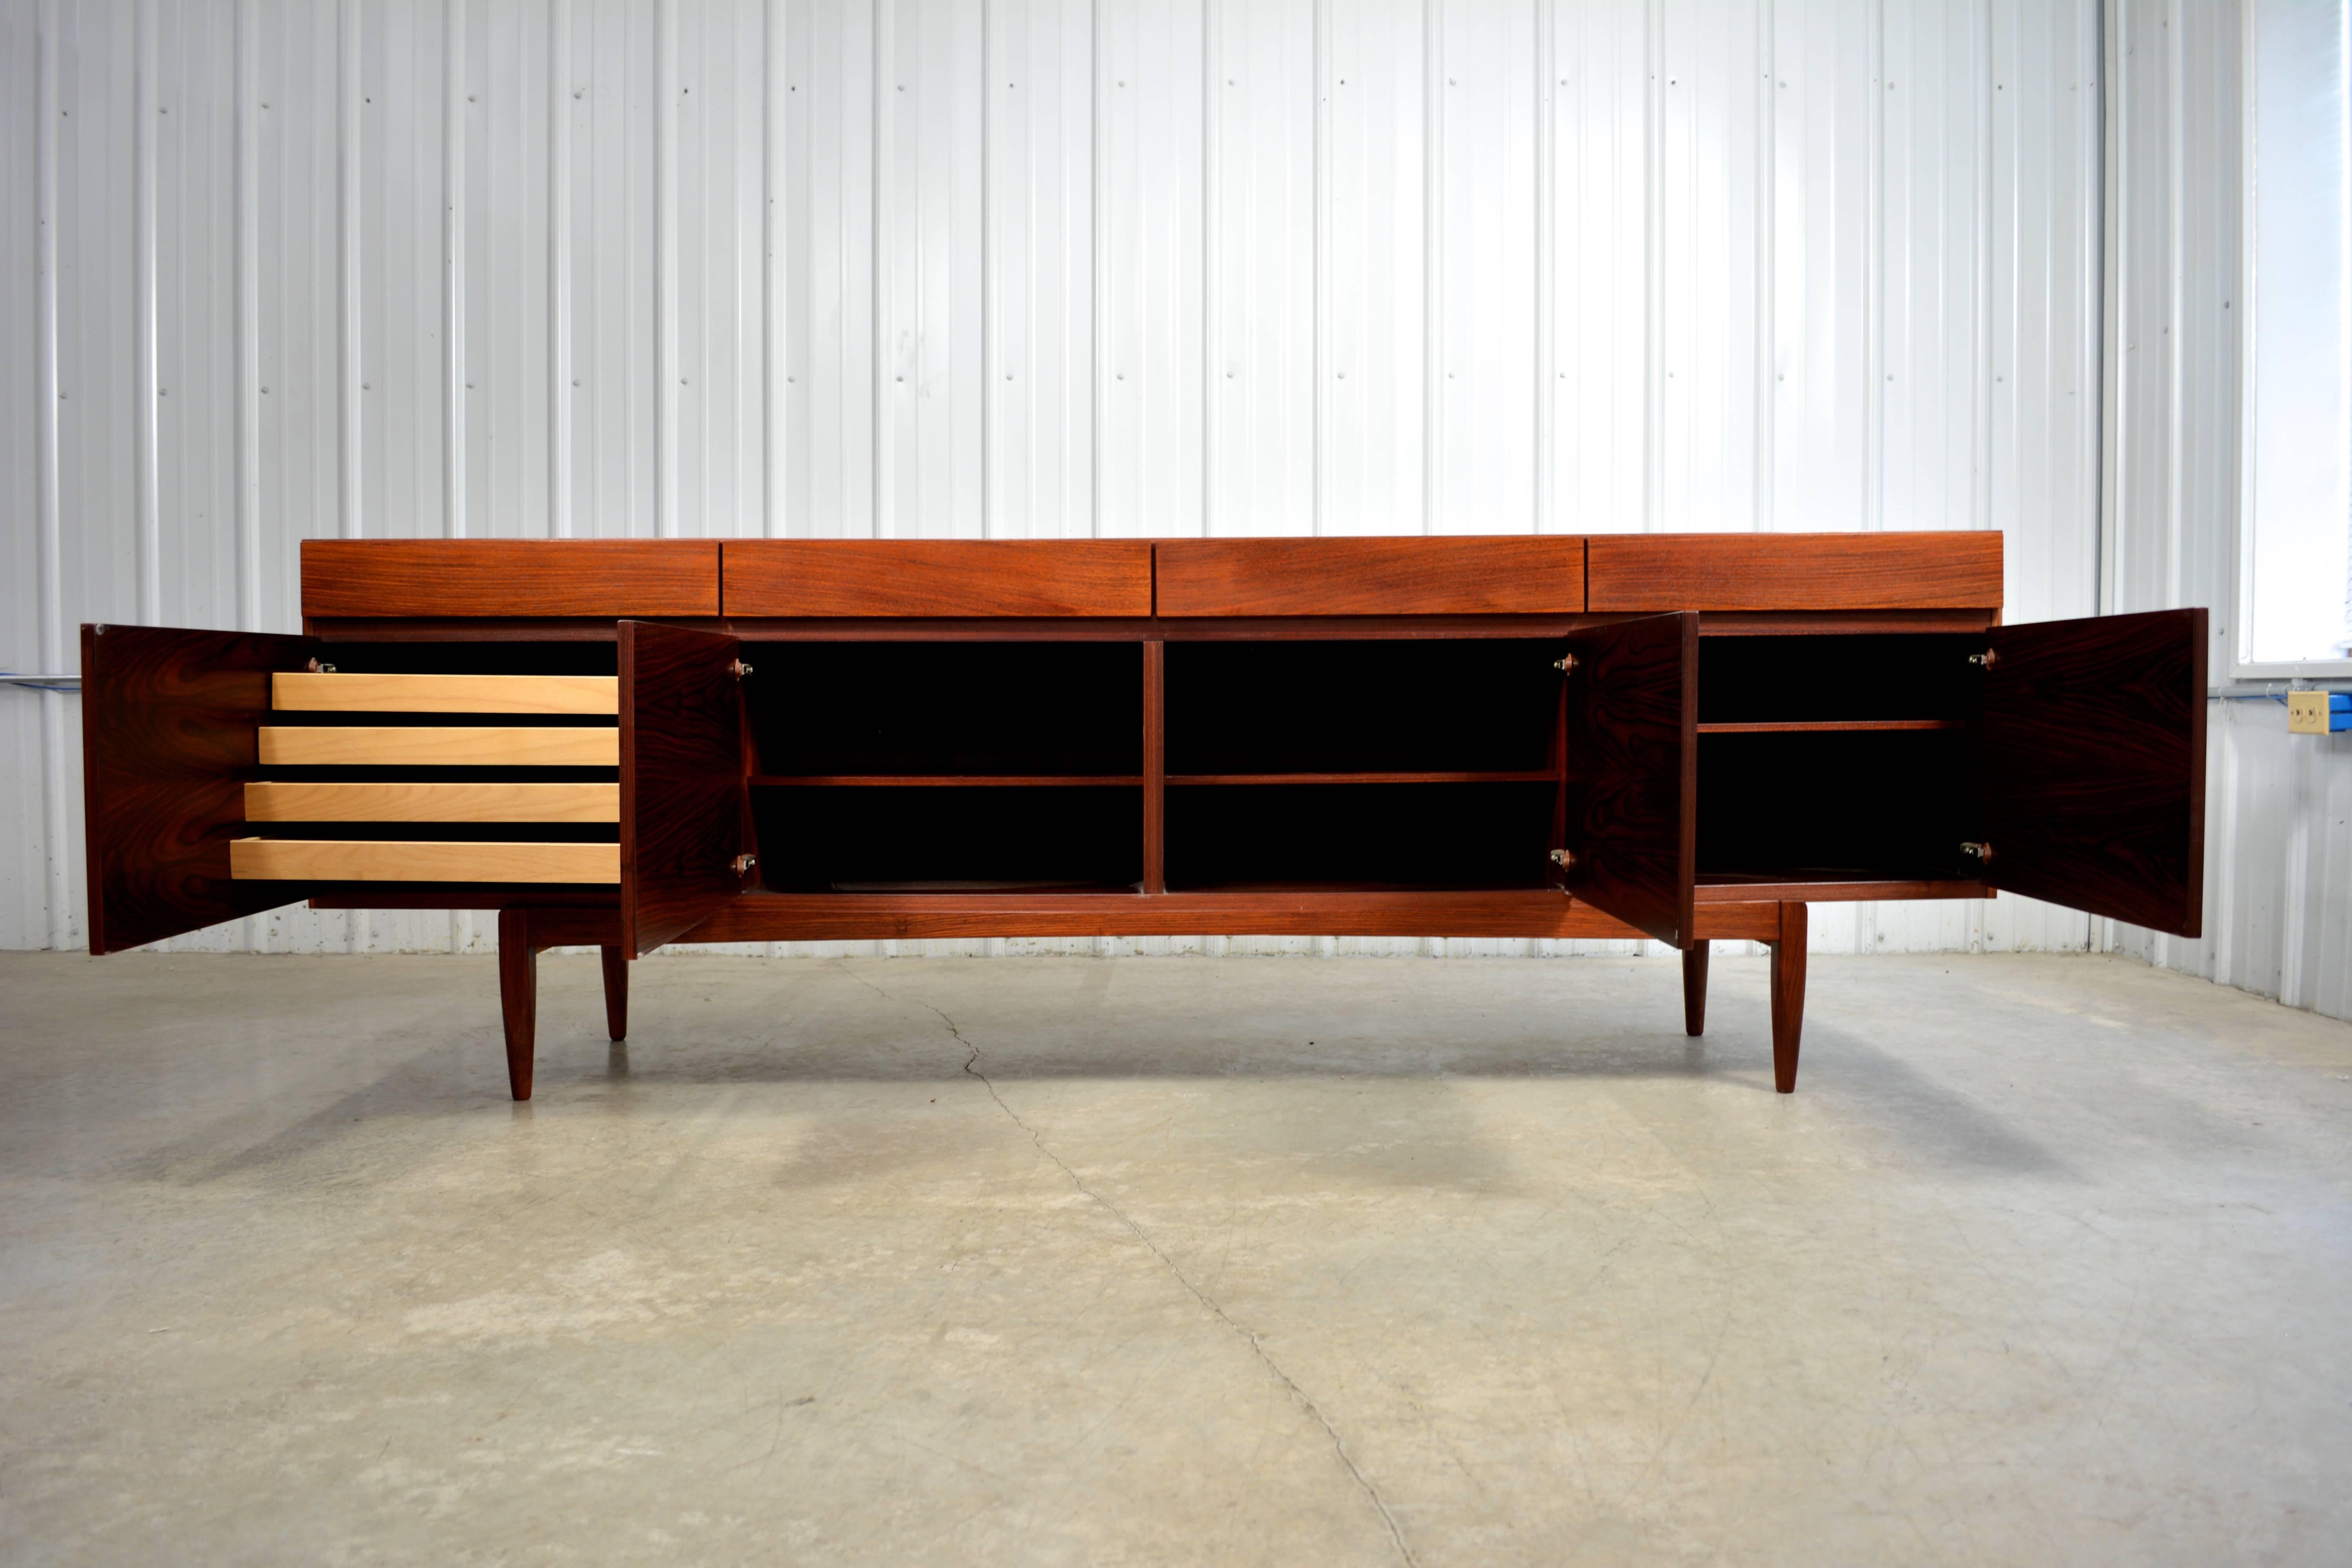 Rosewood credenza by Ib Kofod-Larsen for Faarup Mobelfabrik. Exceptional rosewood grain. Four doors open to reveal open storage with adjustable shelves and sliding, felt lined drawers. Above, there are four additional drawers.